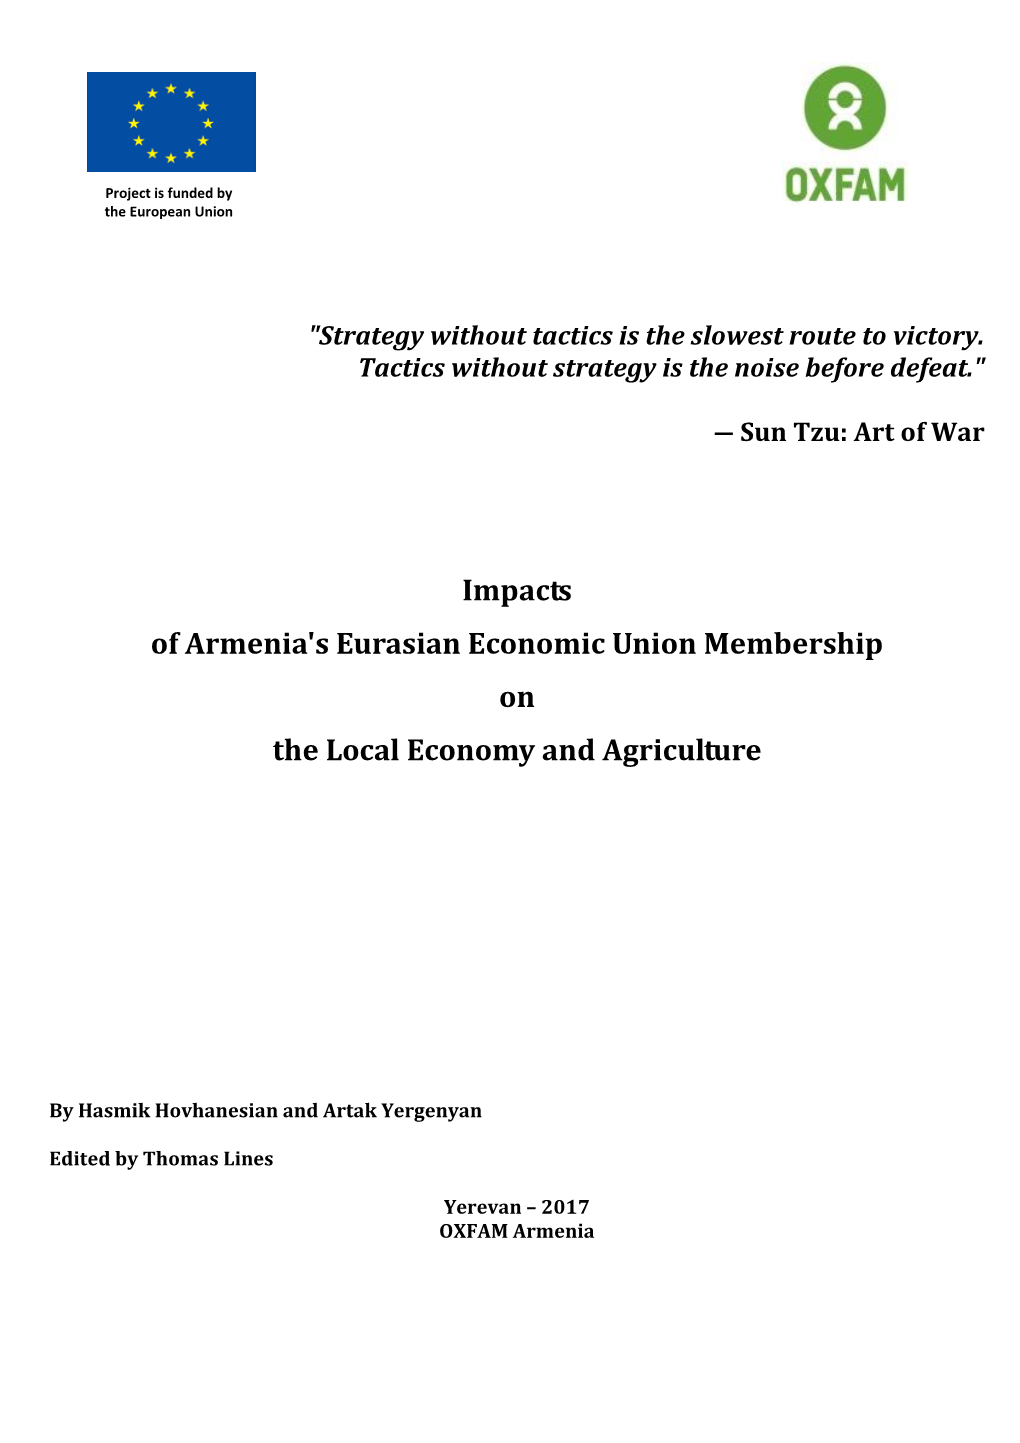 Impacts of Armenia's Eurasian Economic Union Membership on the Local Economy and Agriculture